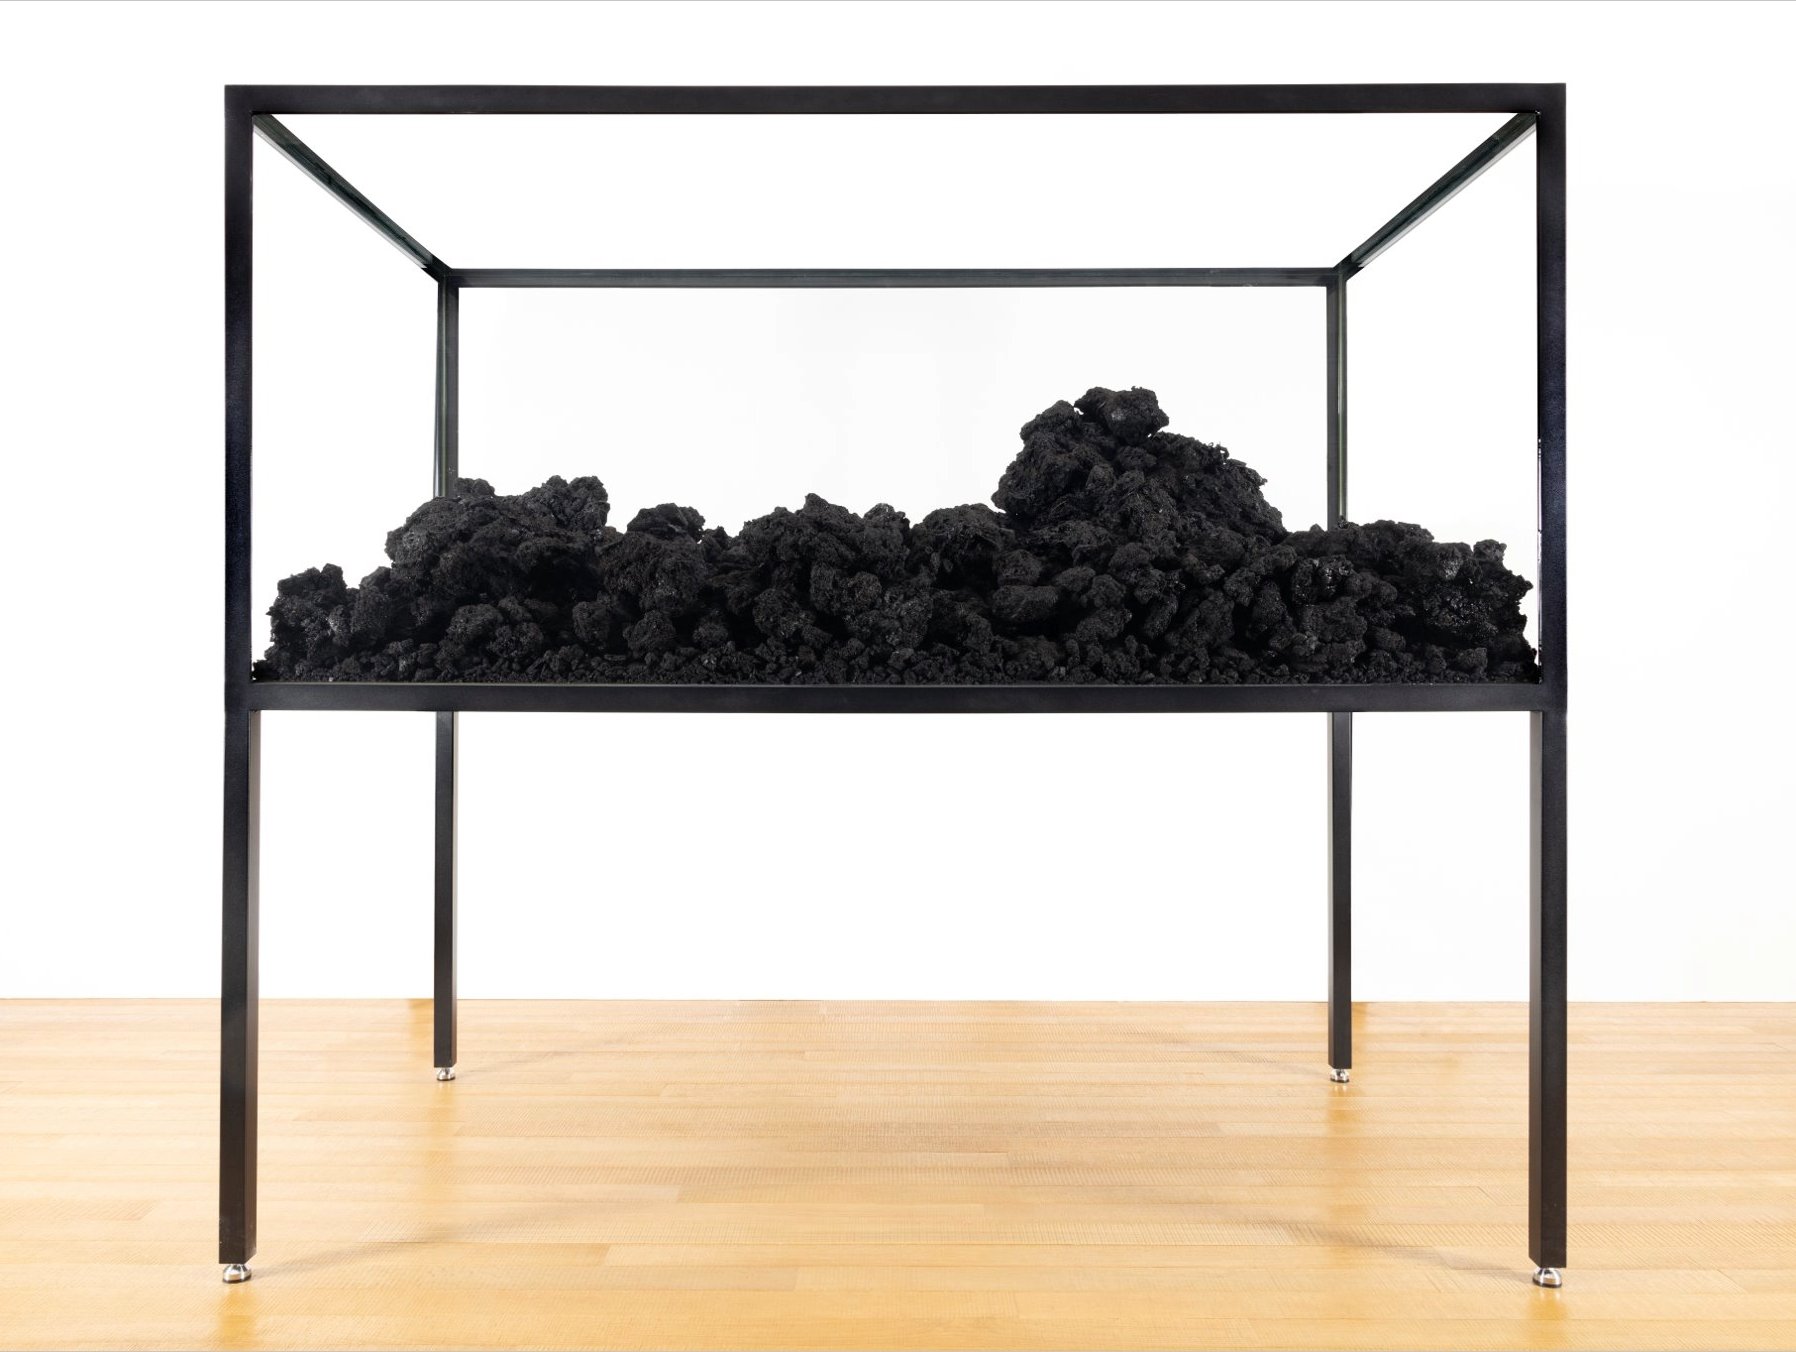 Clods of irregular-shaped black residue are displayed in a rectangular, black-framed glass case supported by four thin legs. The black residue fills approximately a quarter of the case and resembles soil.